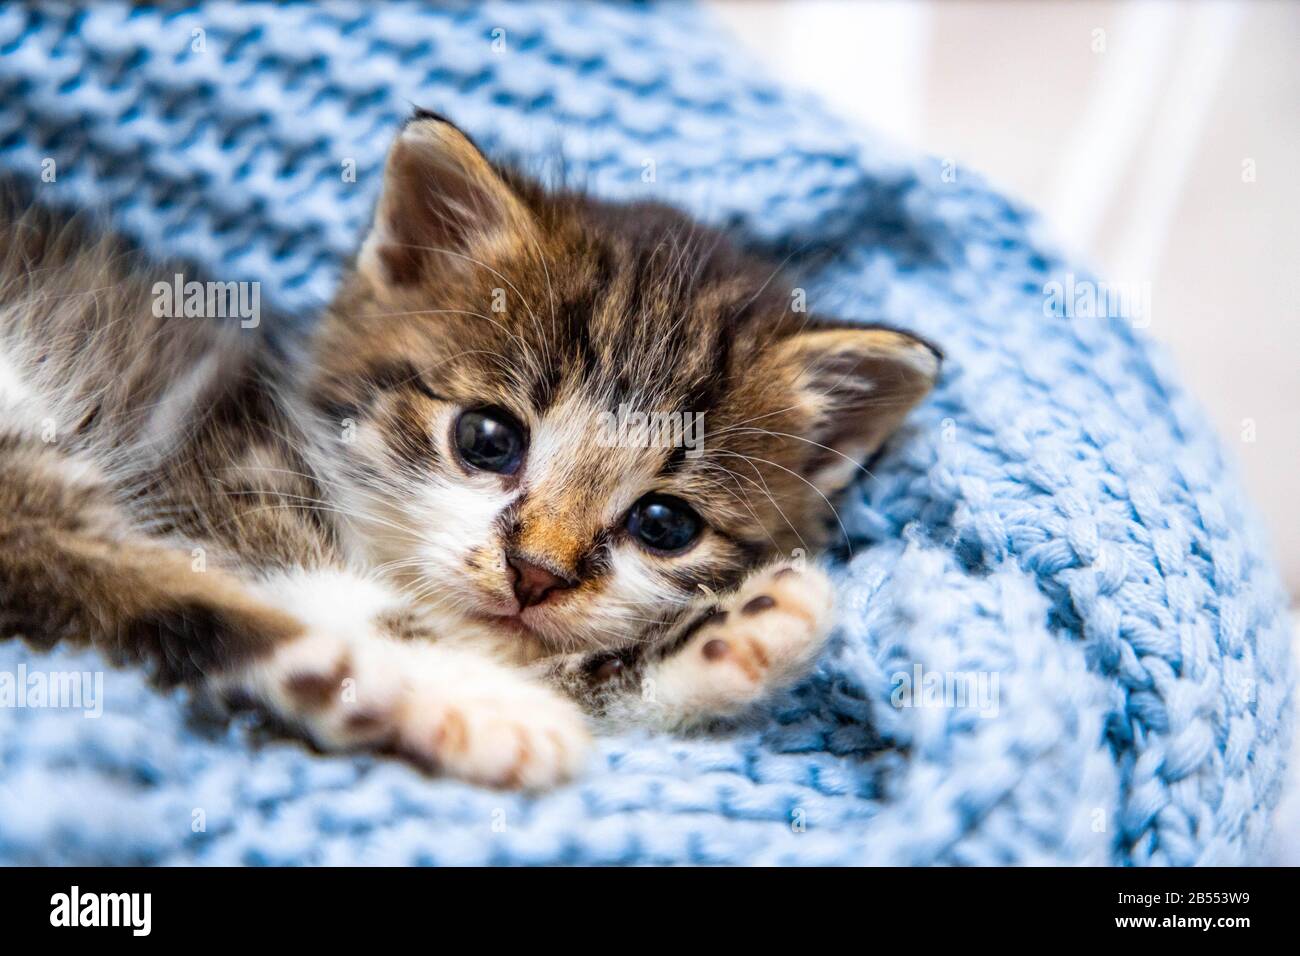 Cute kitten laying on blue blanket, with blue eyes wide open looking at the camera. Close up Stock Photo